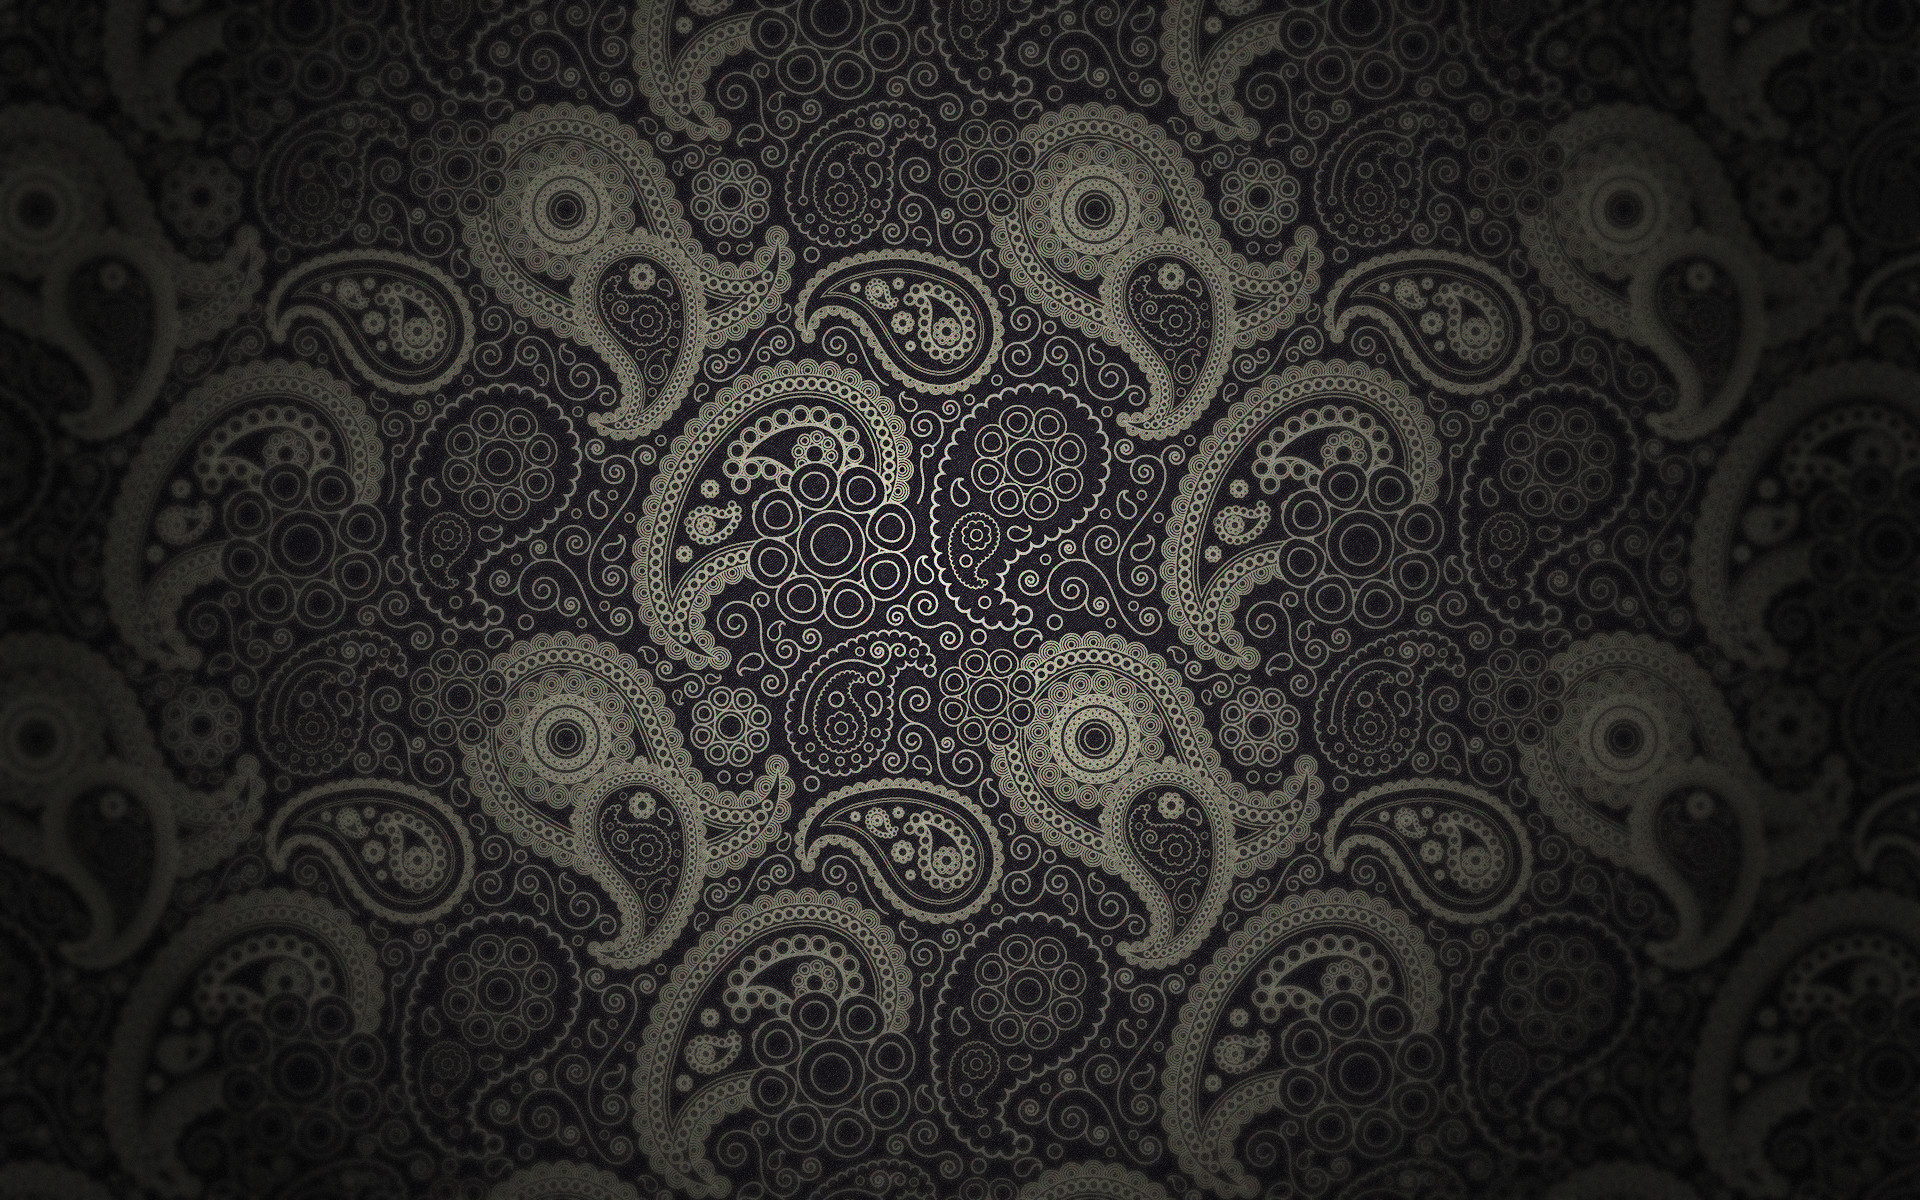 1920x1200 1024x1024 paisley wallpaper computer backgrounds seamless background paisley  .